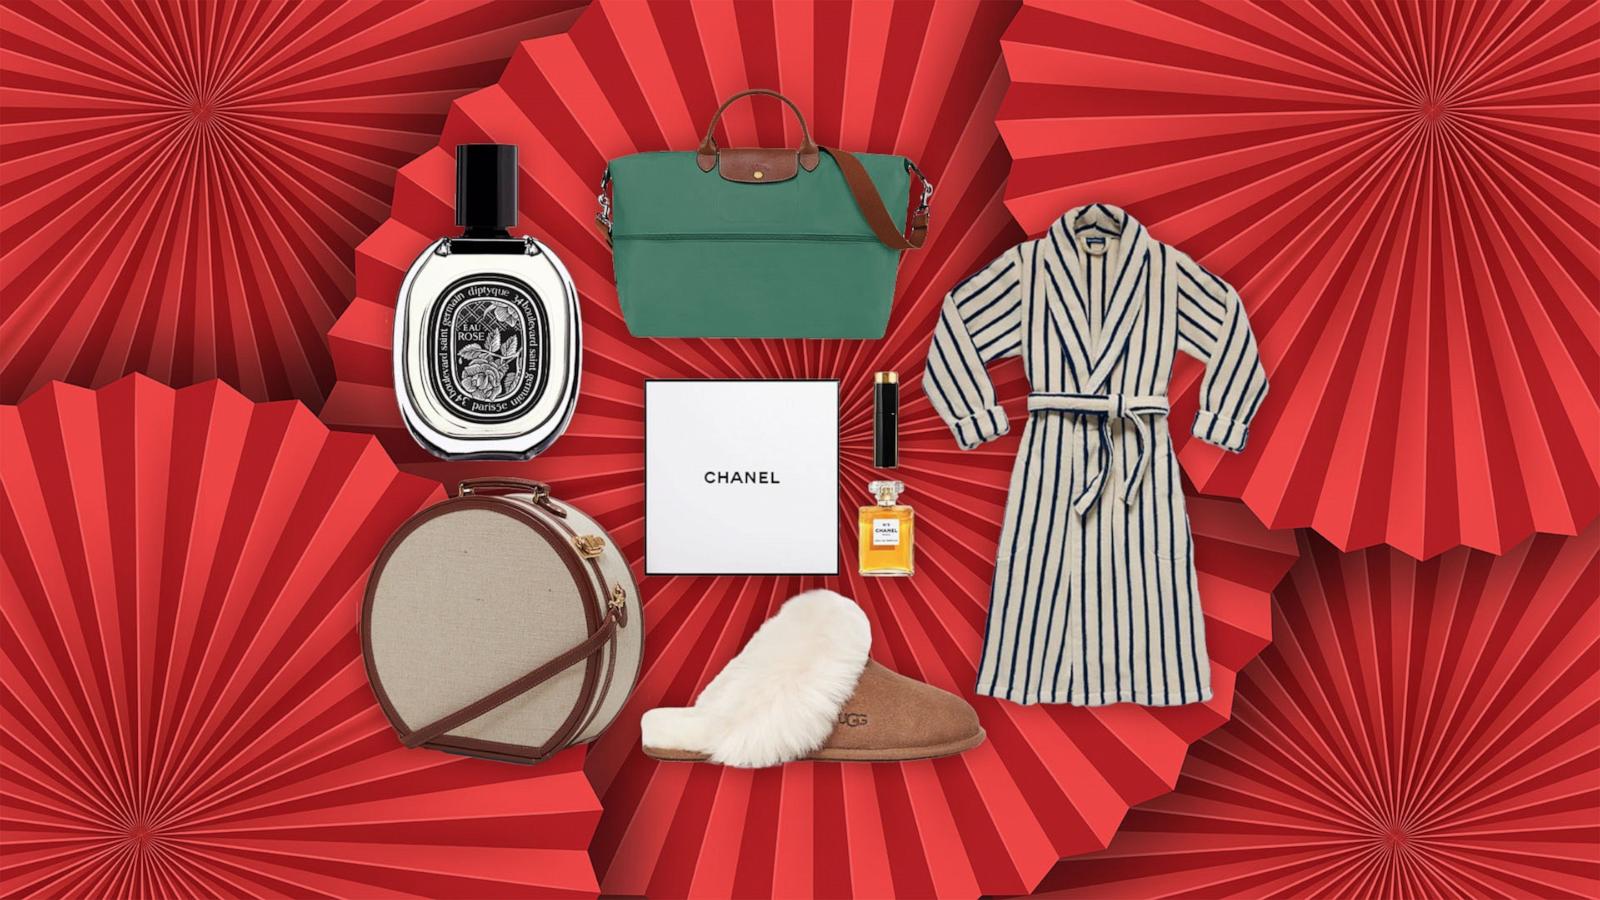 The Most Adorable Christmas Gifts for Women Under $25